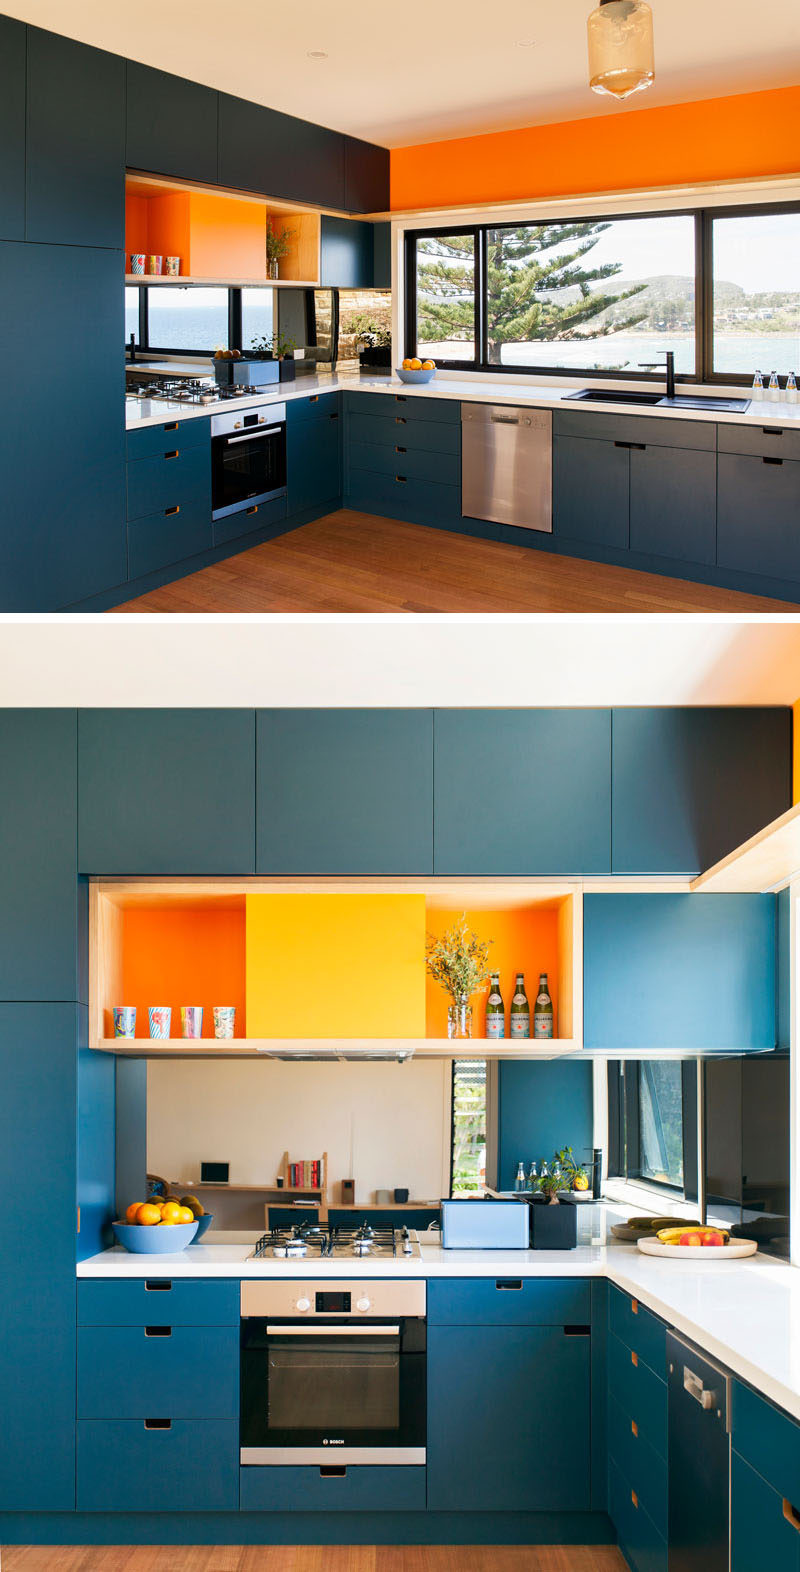 This dark blue kitchen is brightened up with white countertops and colorful pops of orange.